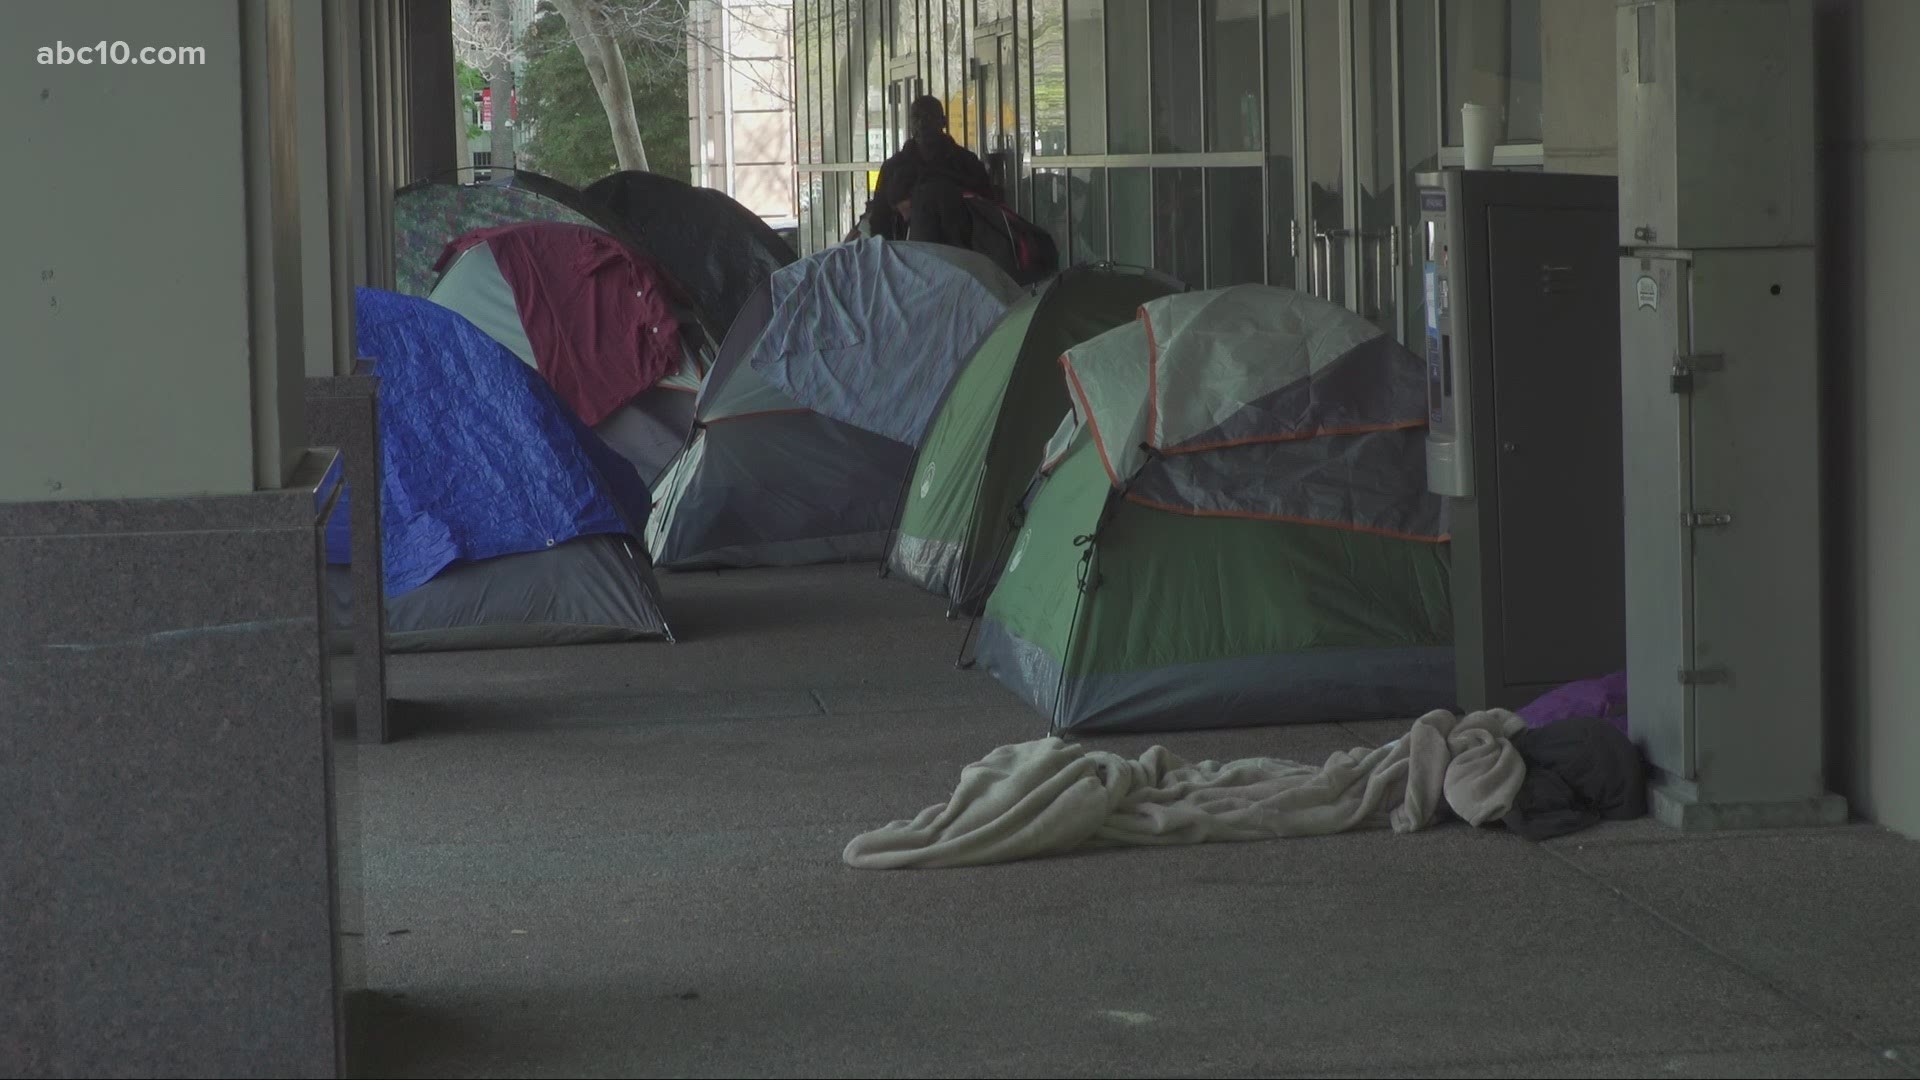 Sacramento normally only opens warming shelters when temperatures are freezing. Tuesday, the City decided to now keep them open no matter the weather.